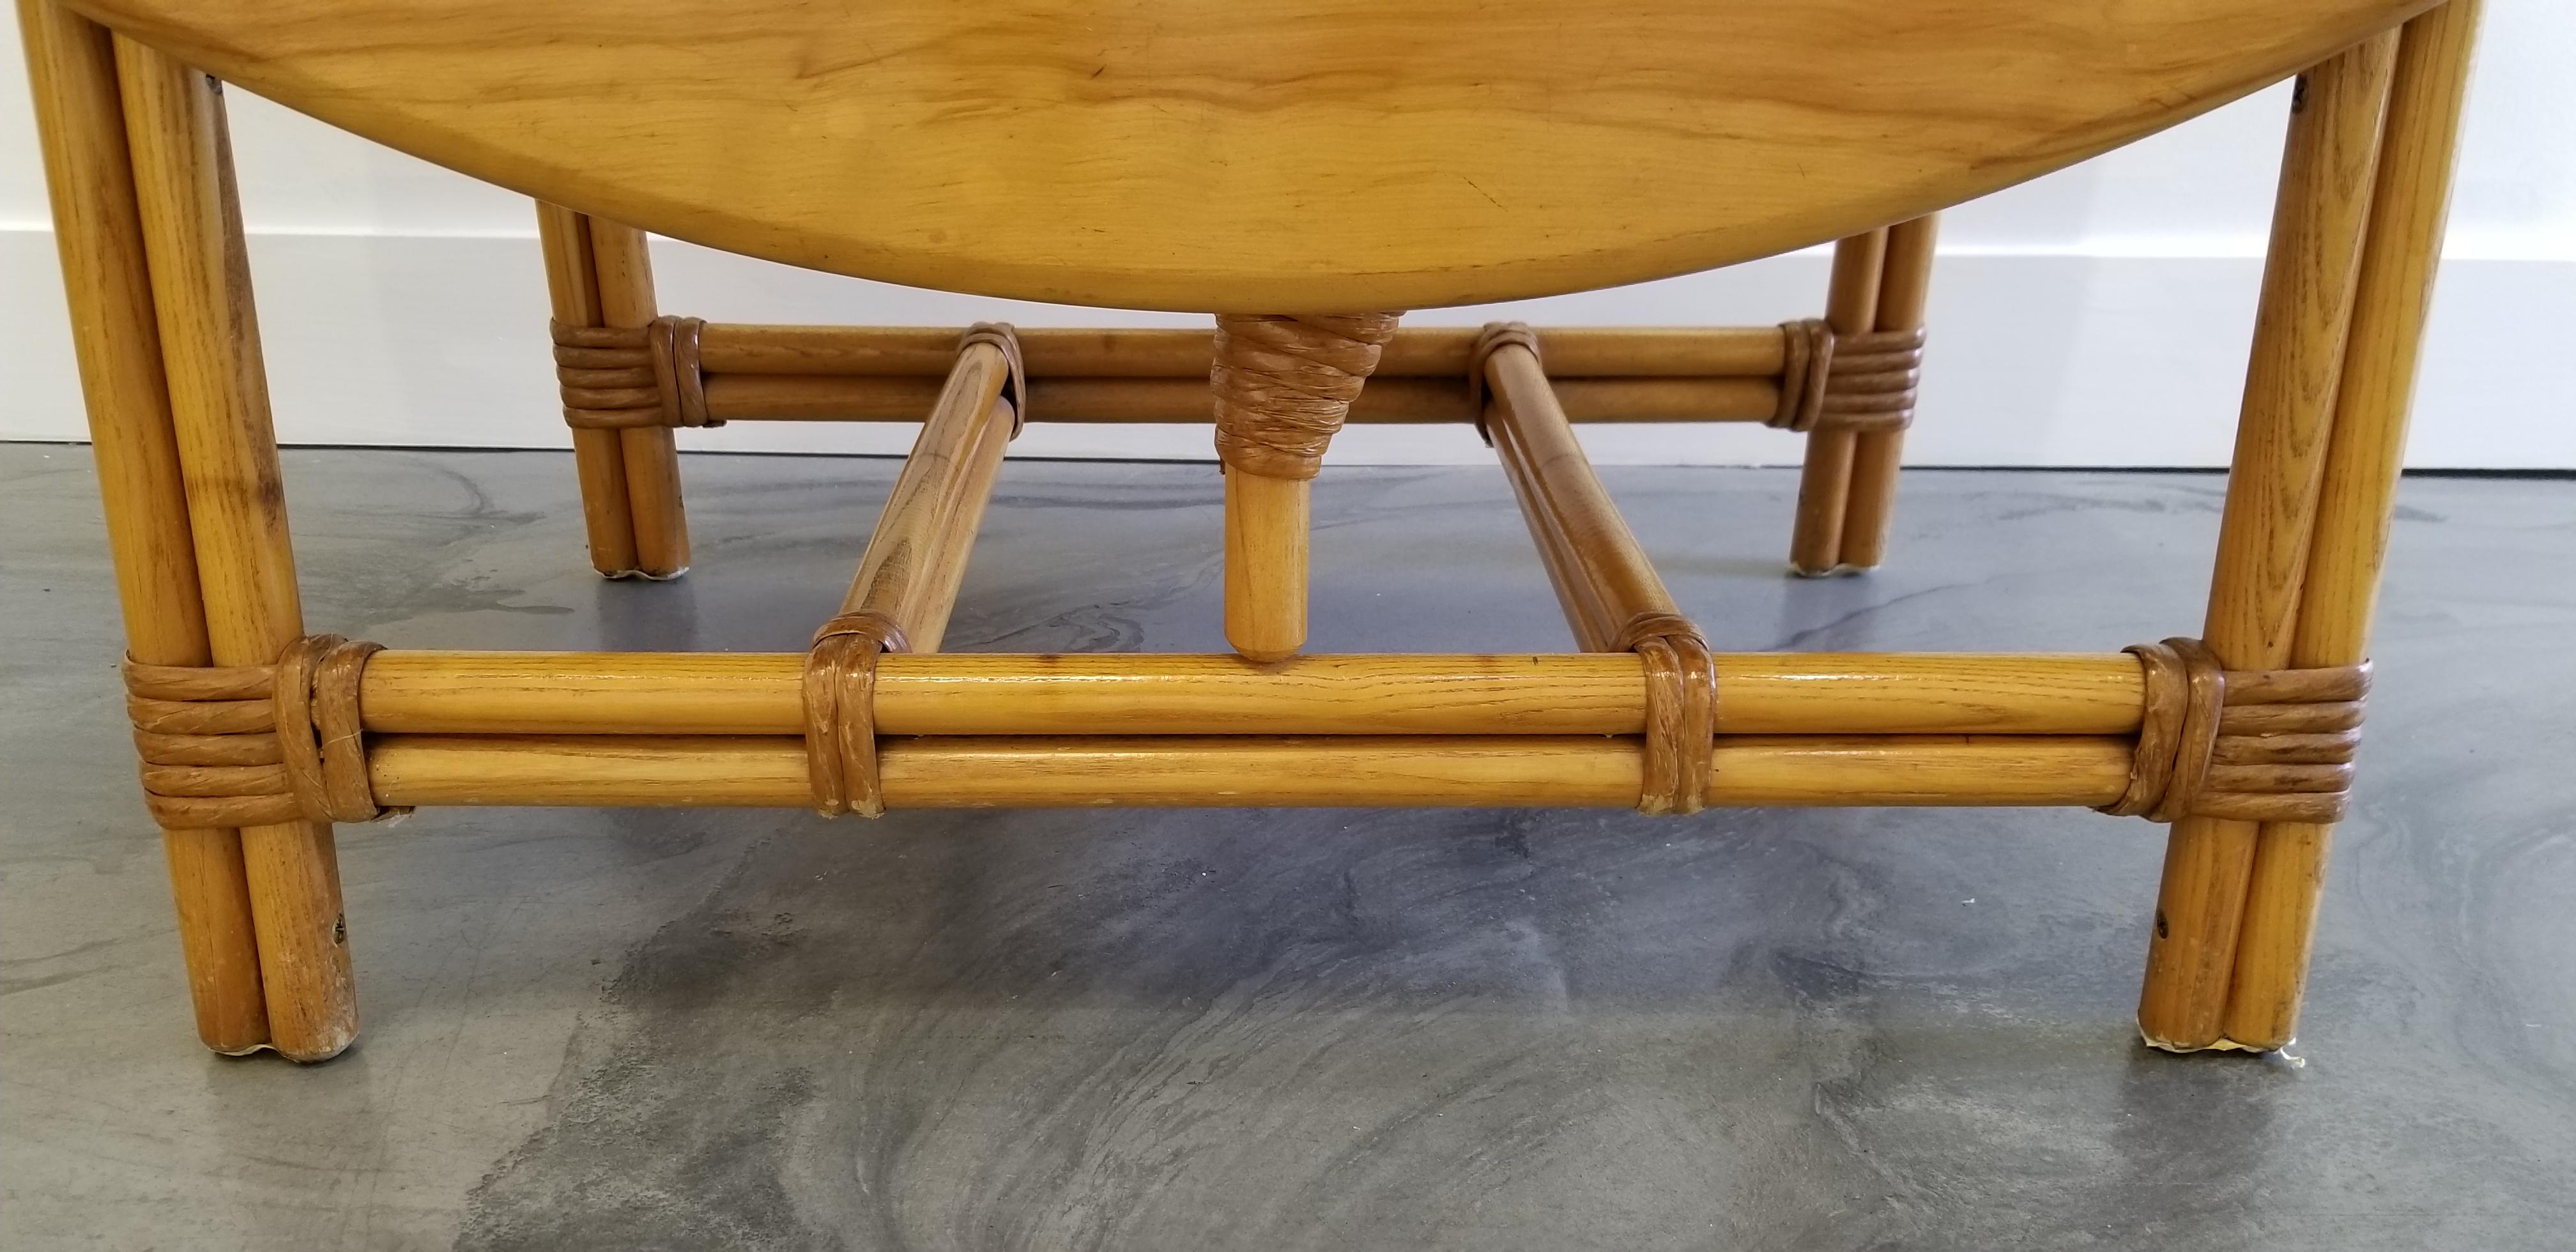 20th Century Rattan, Maple and Ash Gateleg Dining Table by Heywood Wakefield